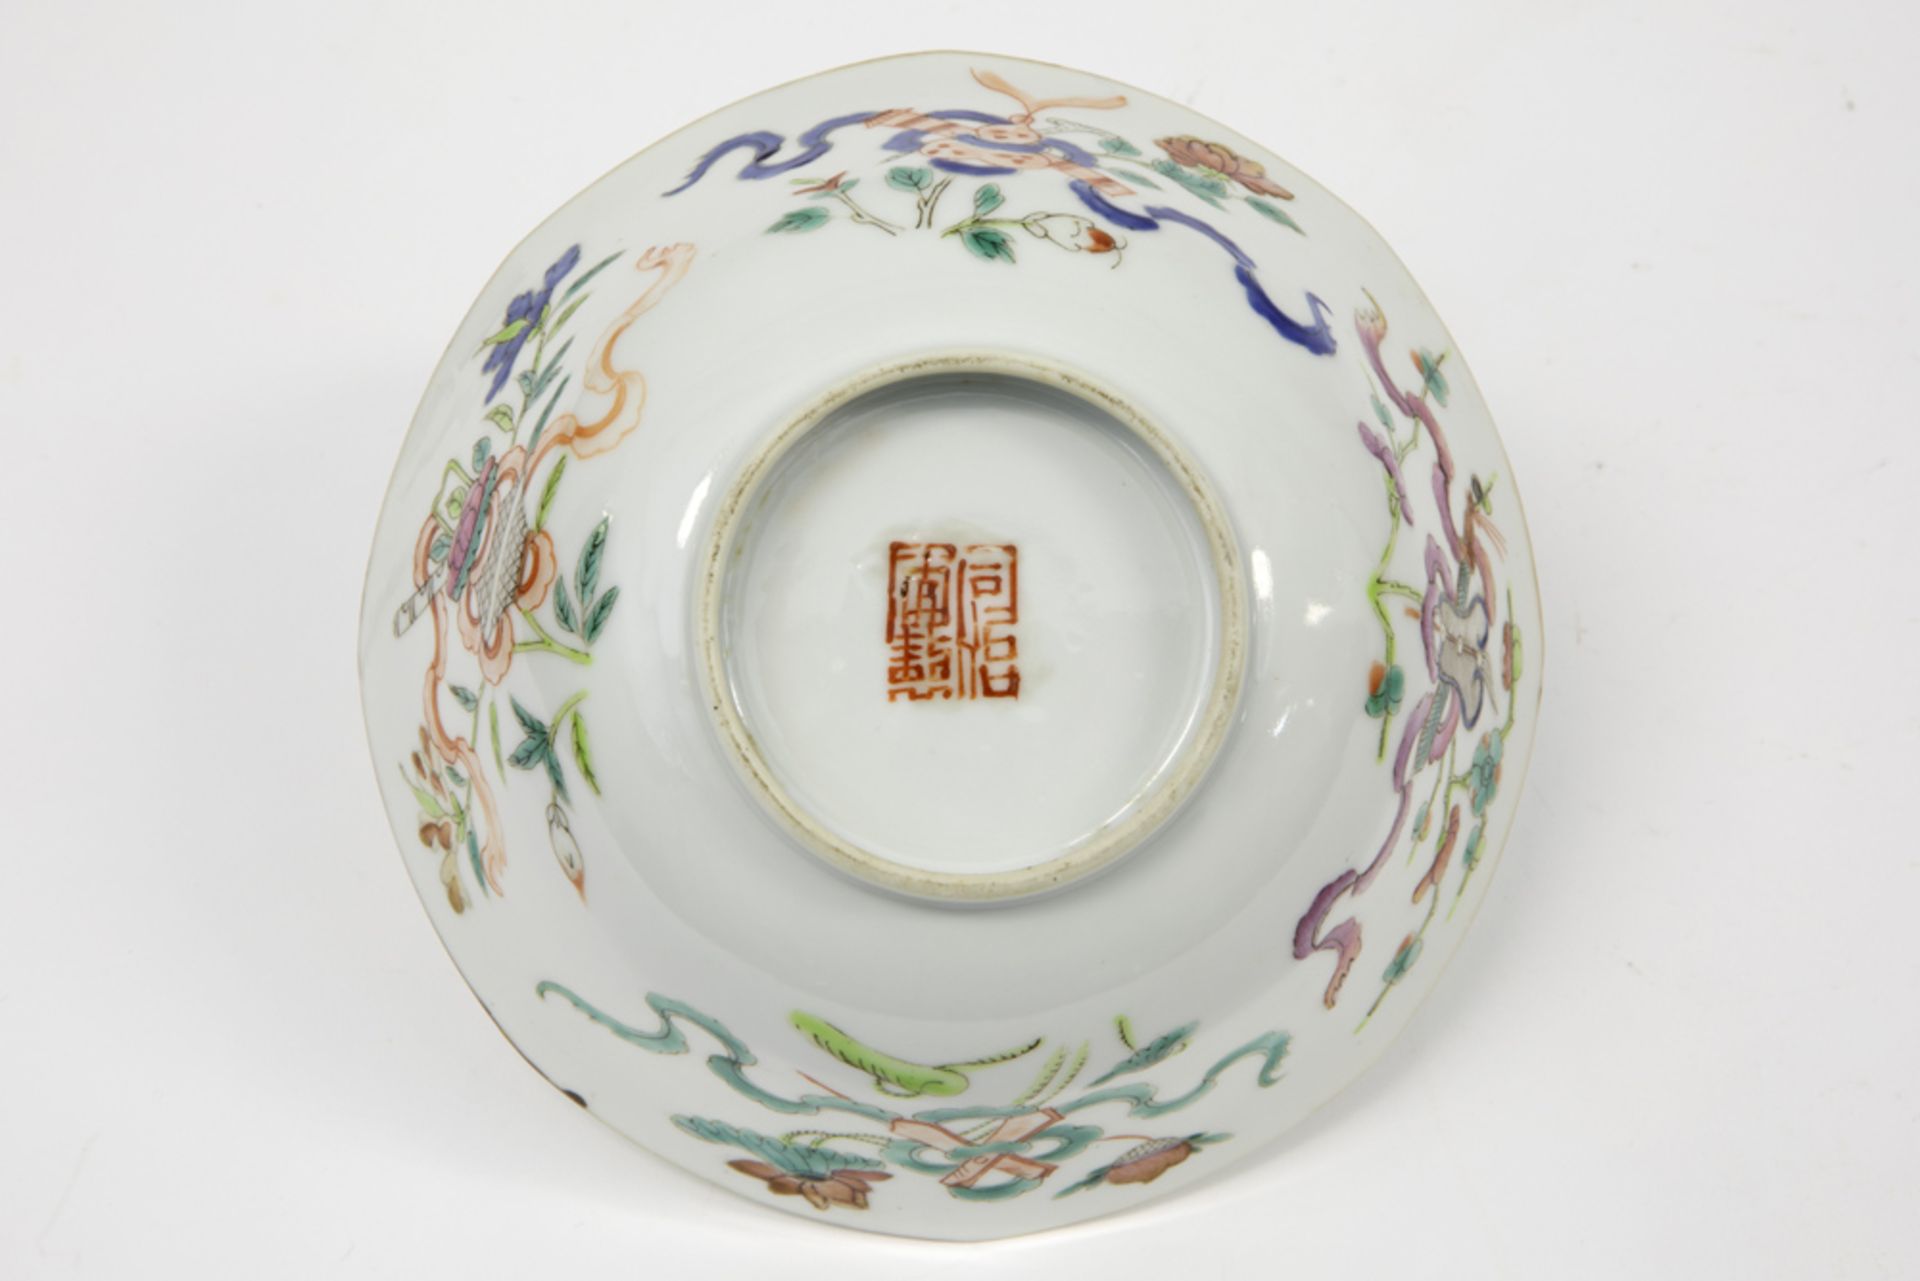 19th Cent. Chinese bowl in Hsien Feng (Xian Feng) marked porcelain with a polychrome decor || - Image 6 of 7